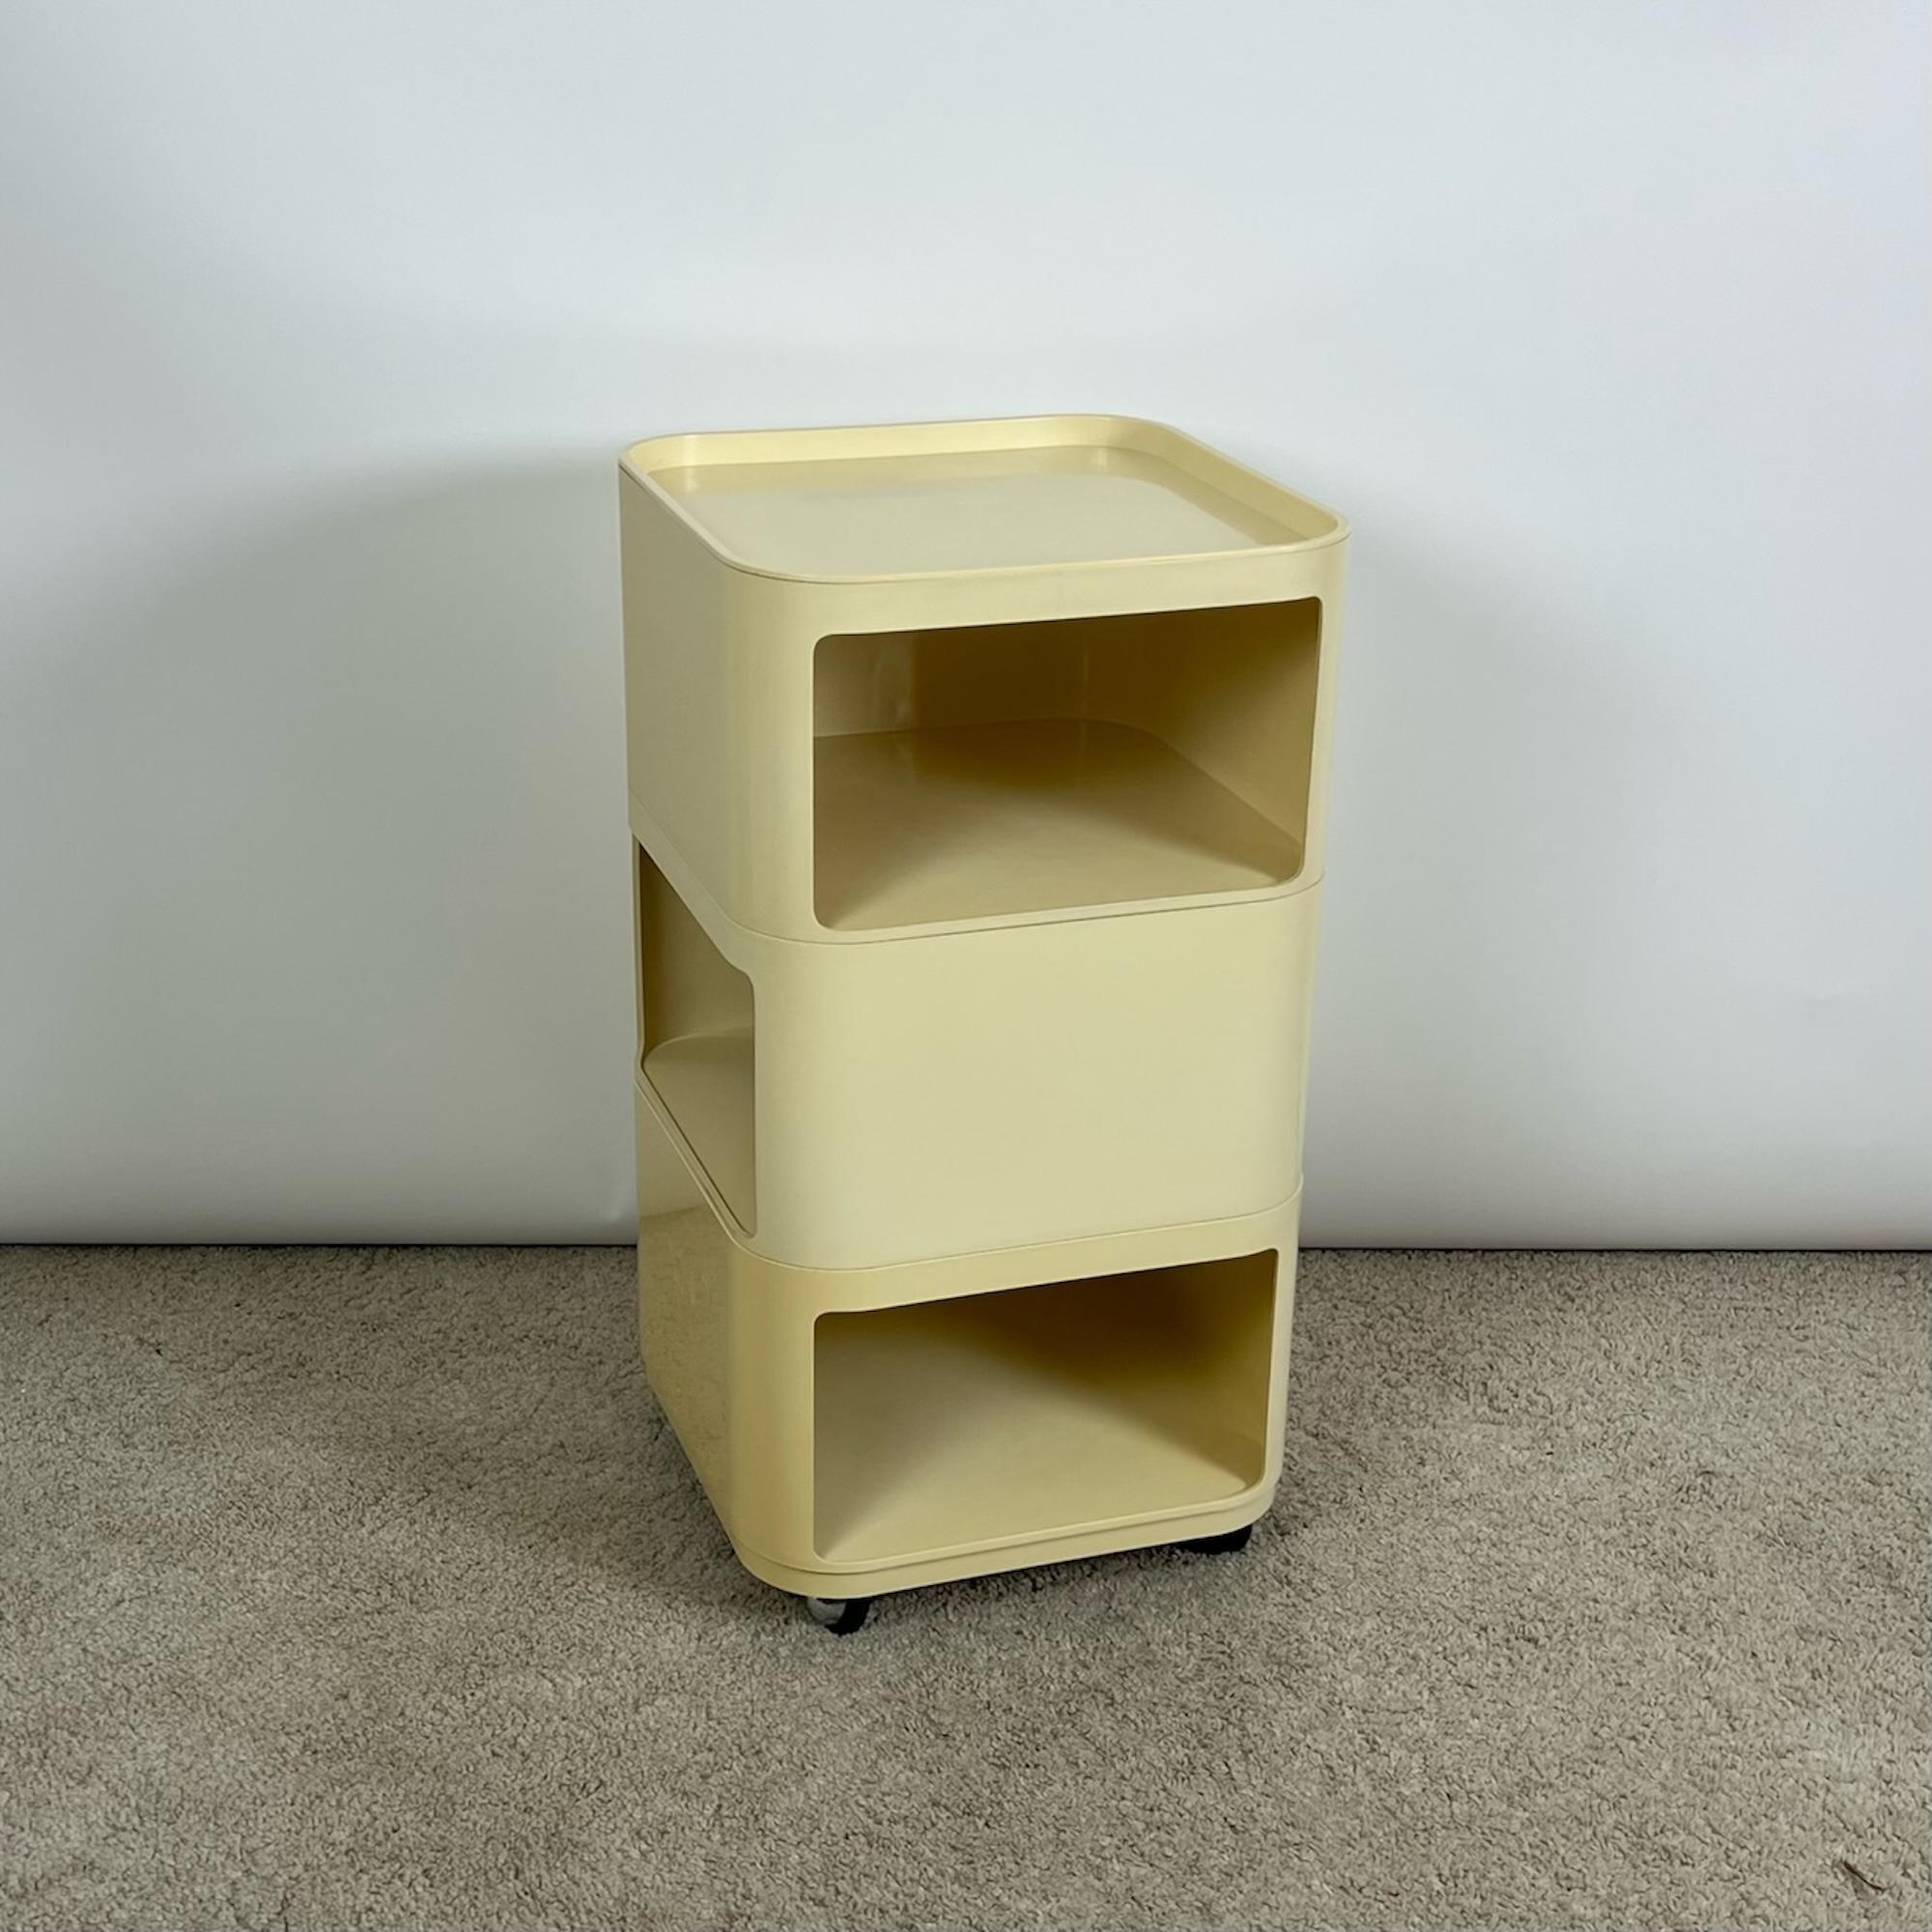 Componibili 4970 Cabinet Modules with Wheels by Anna Castelli for Kartell, 1960s For Sale 3